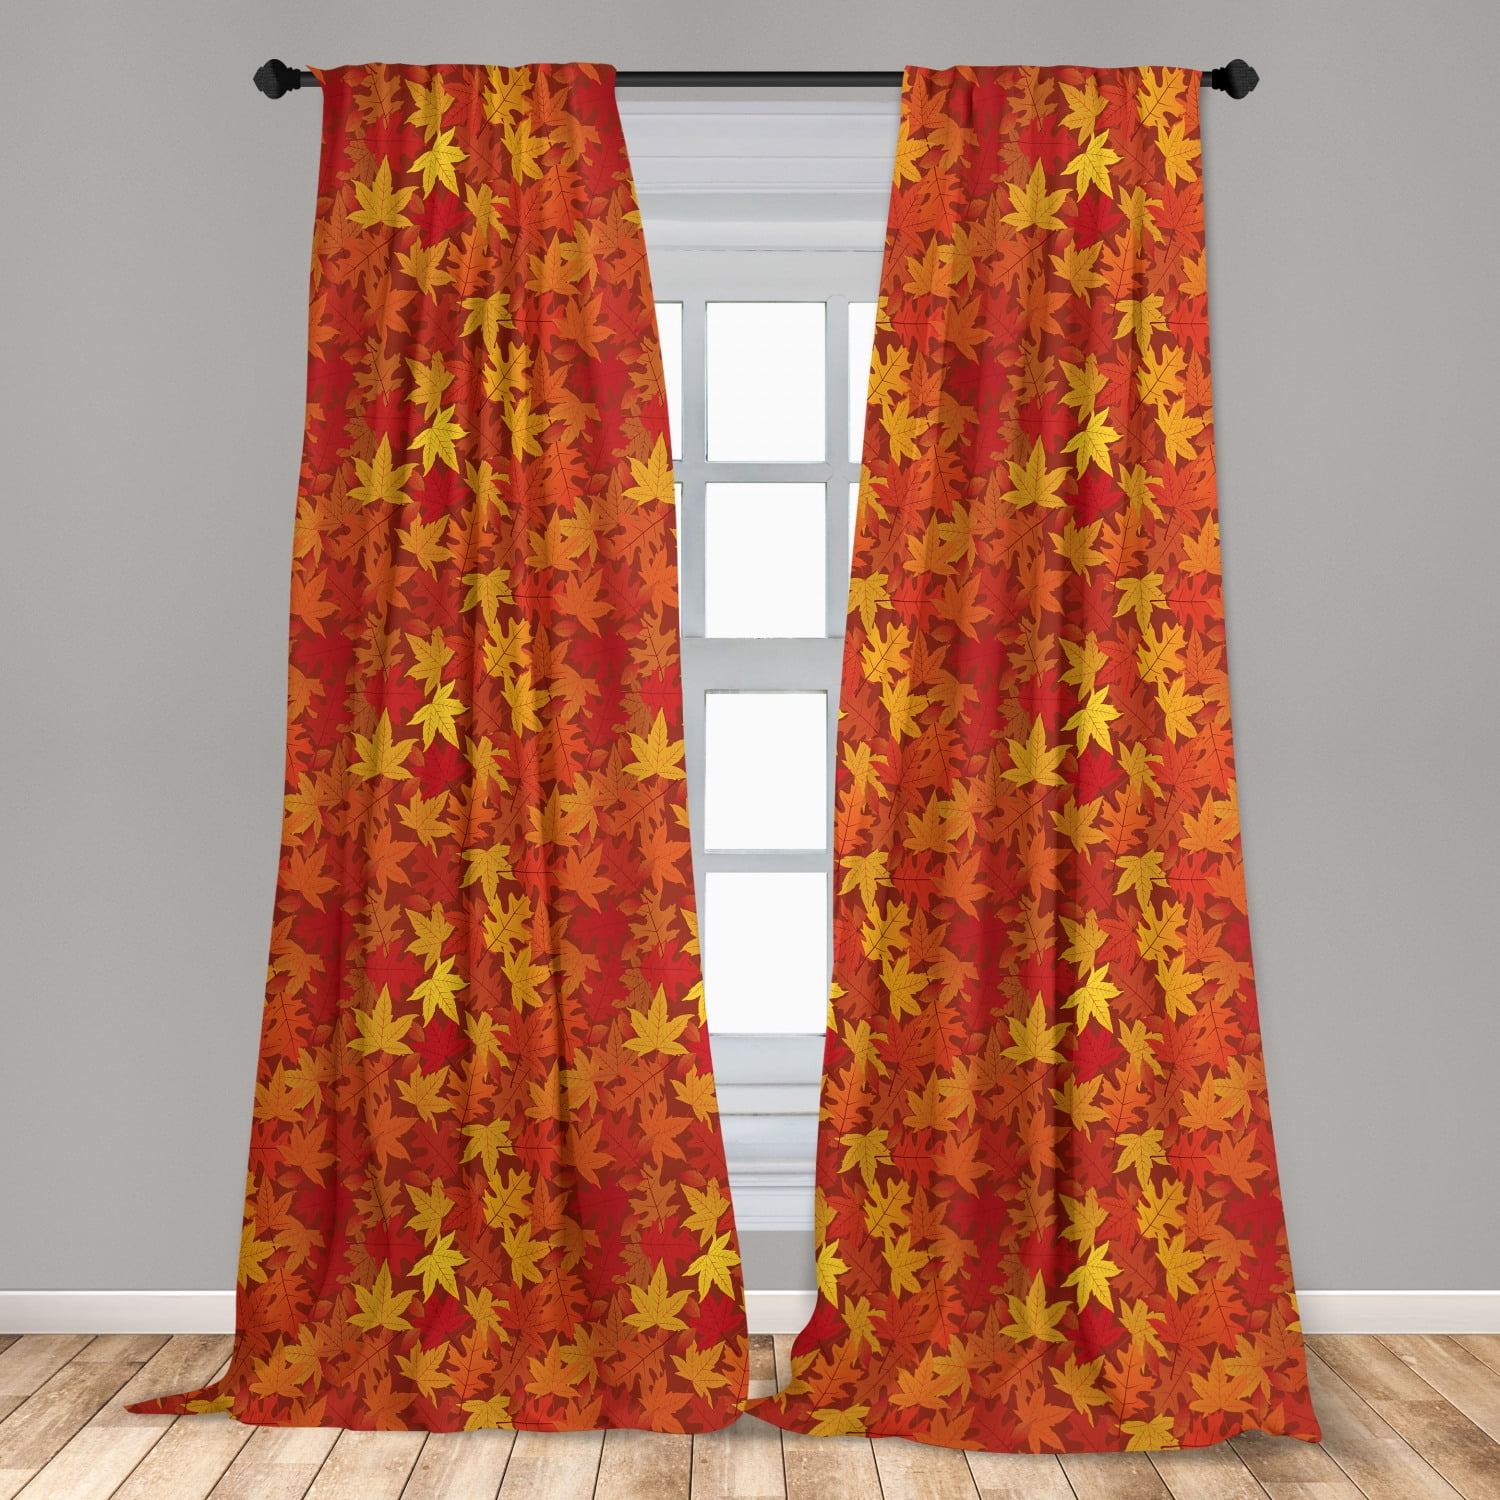 BLACK LINED CURTAIN FAUX SILK RED POPPIES READY MADE EYELET RING TOP WINDOW 